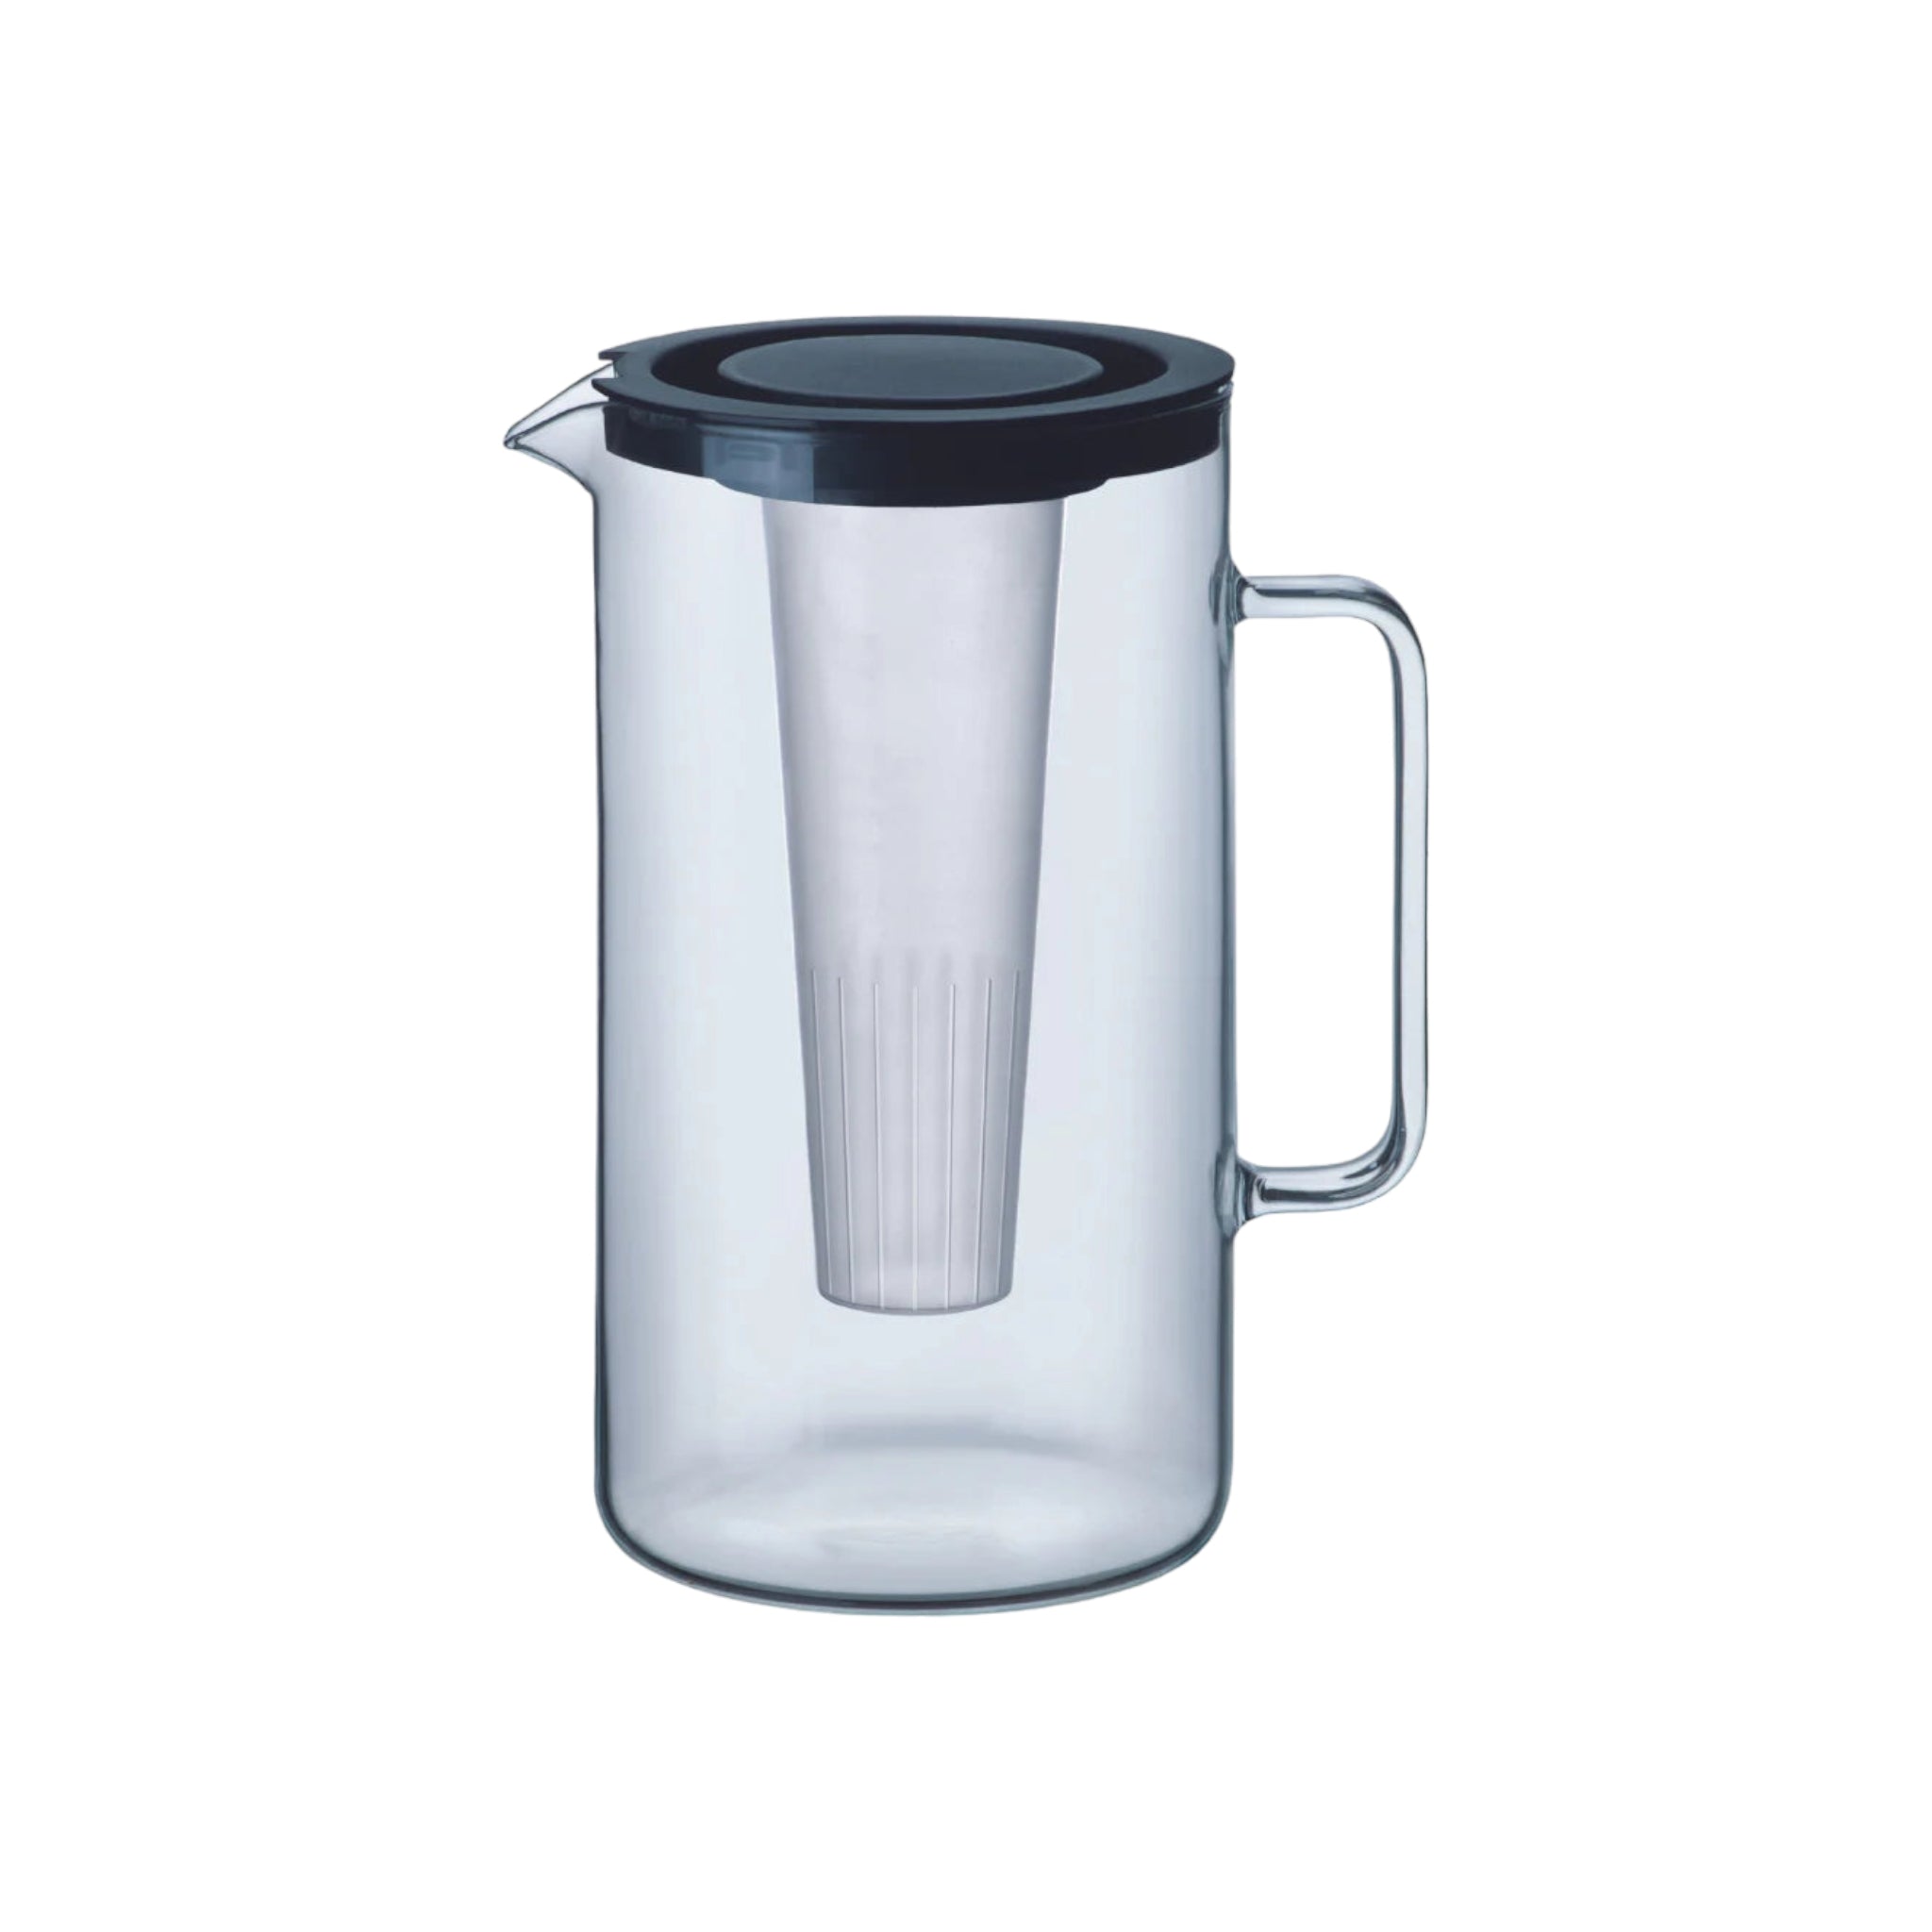 Simax Glass Water Pitcher 2.5L with Ice-Insert & Sieve